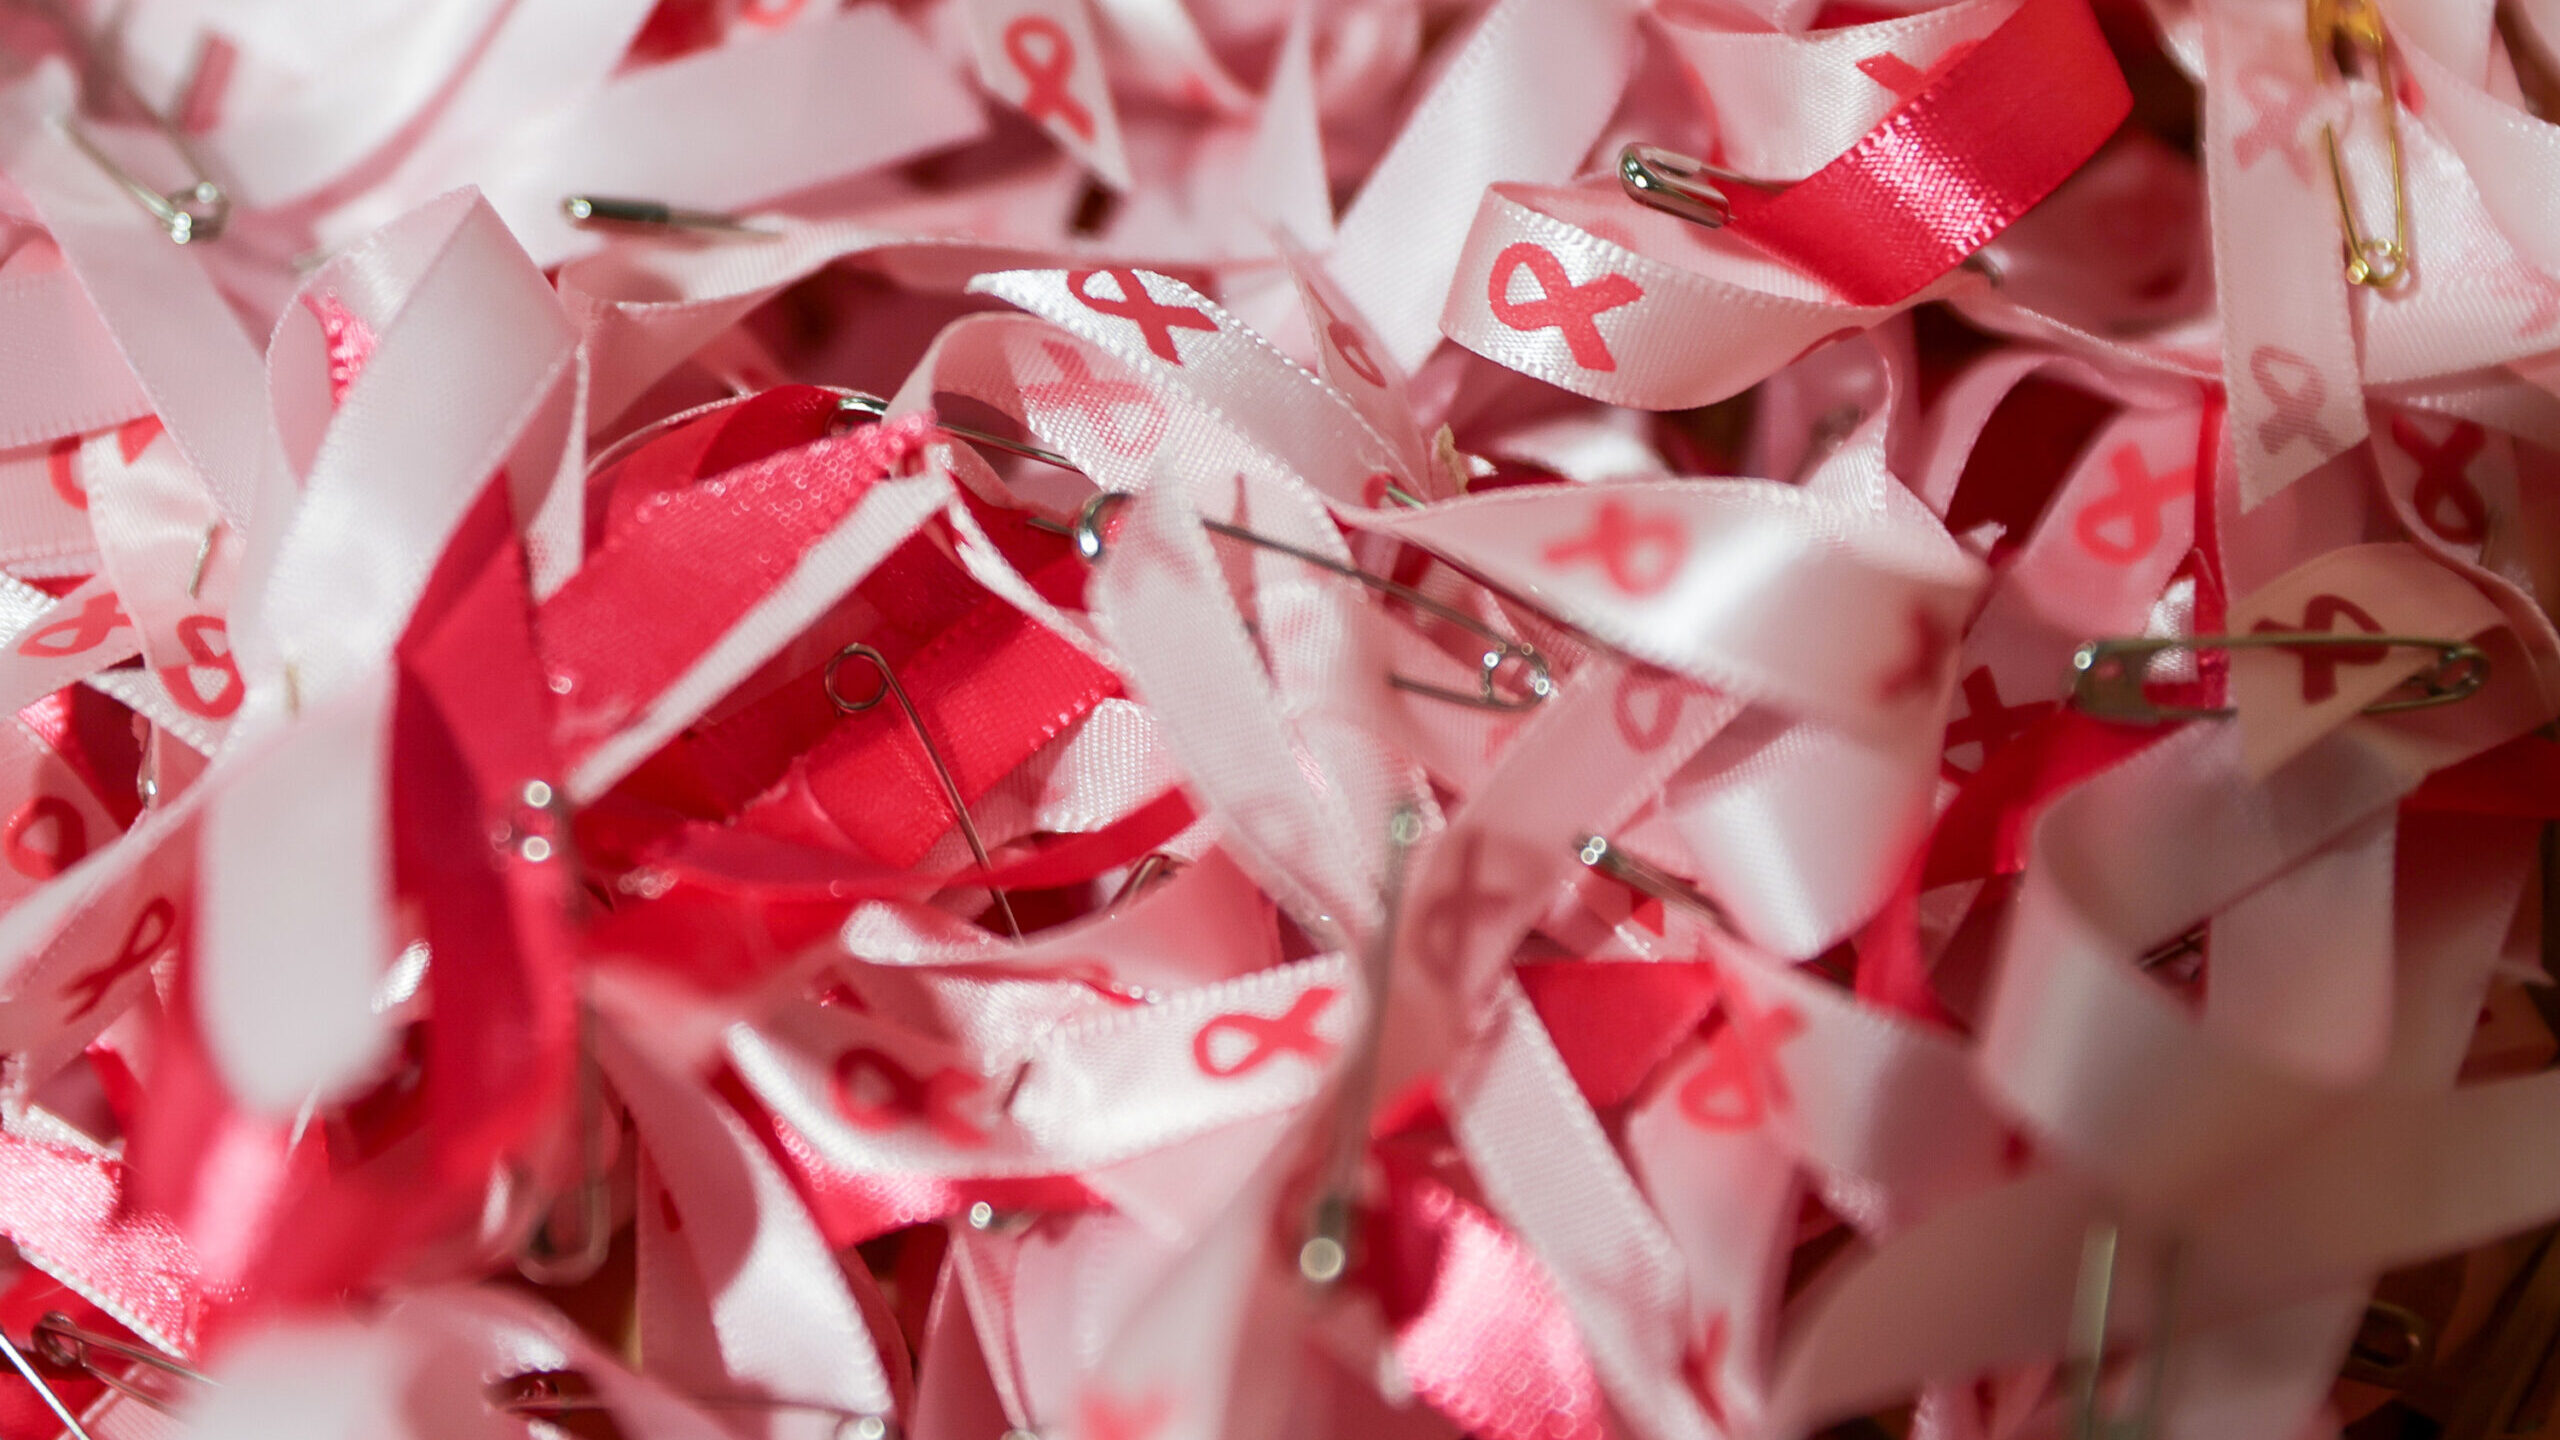 Image of small breast cancer awareness ribbons to mark the beginning of breast cancer awareness mon...